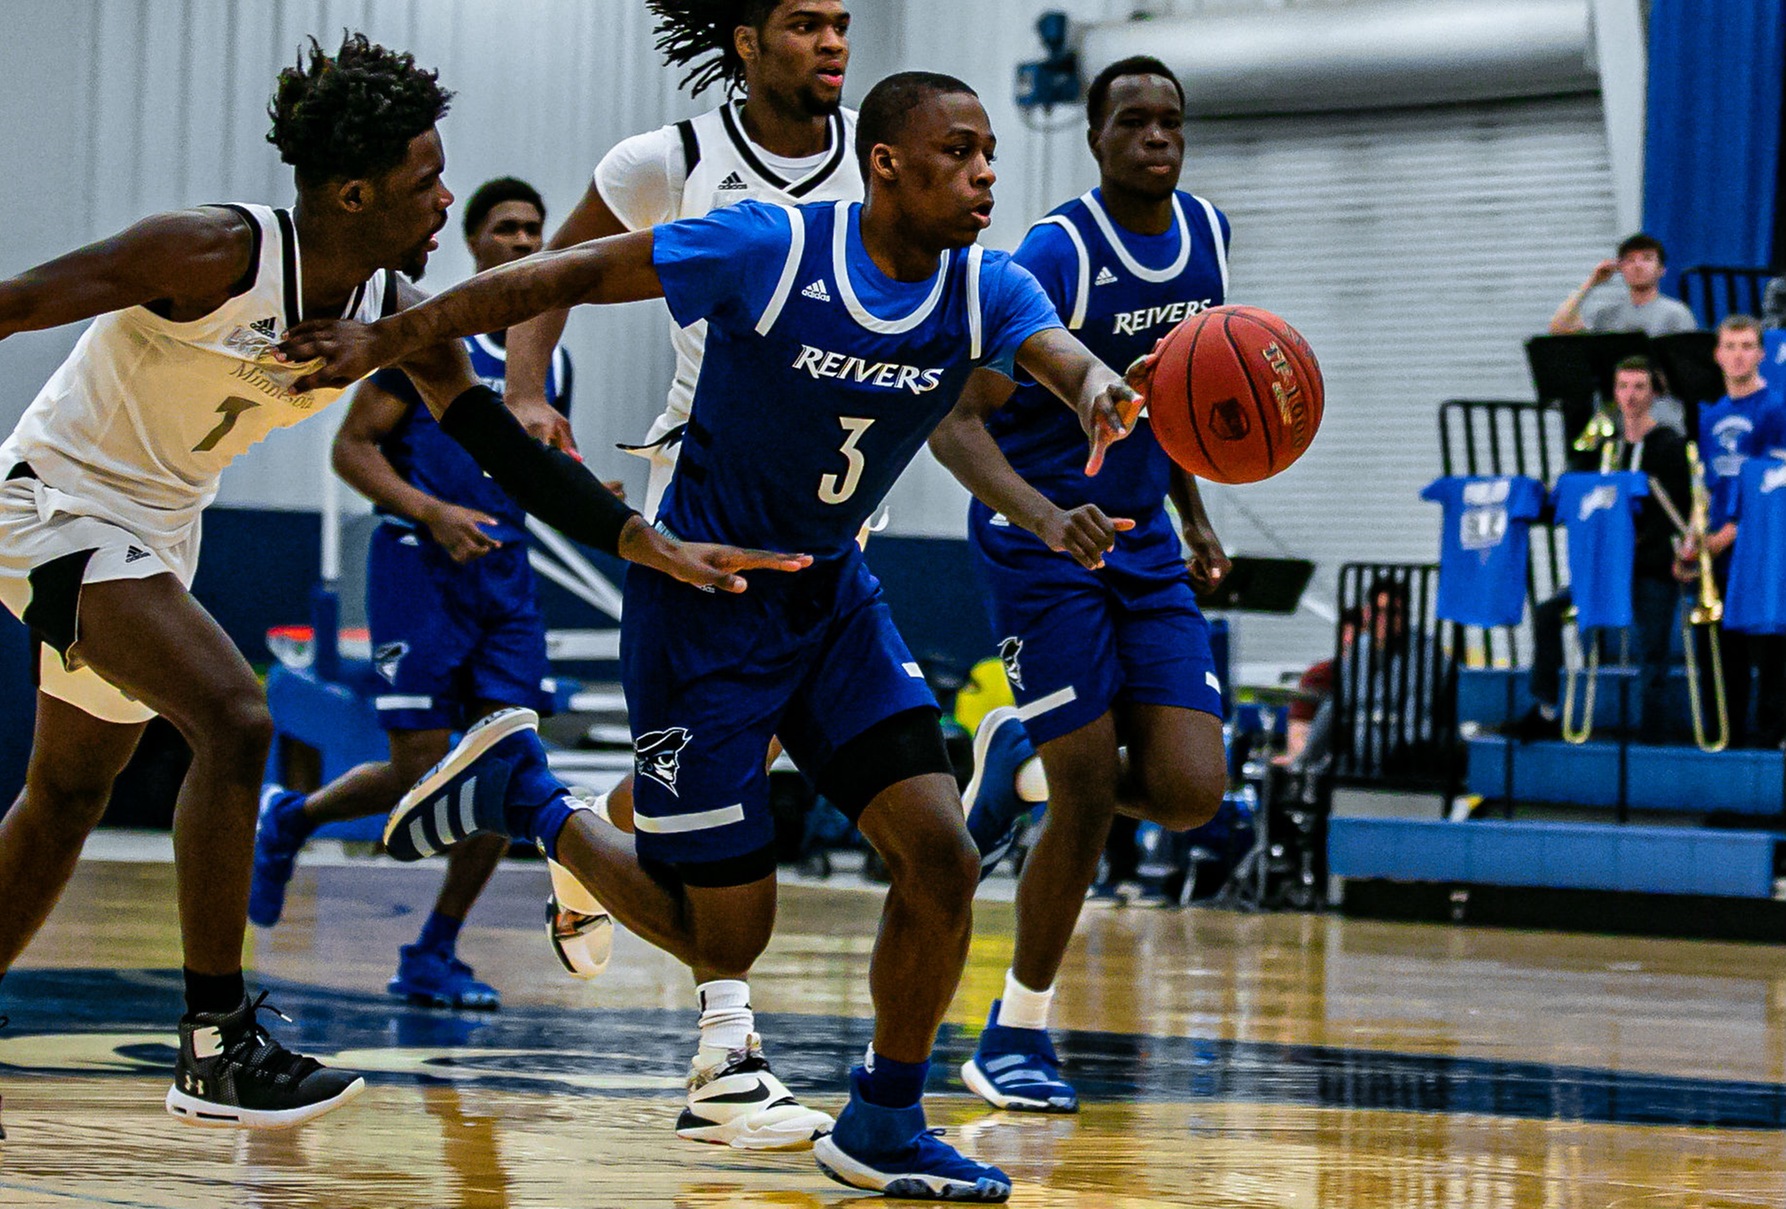 Kaleb Thornton and his Iowa Western teammates fell in the conference opener Saturday (1/11) evening on the road to Northeast 89-83.